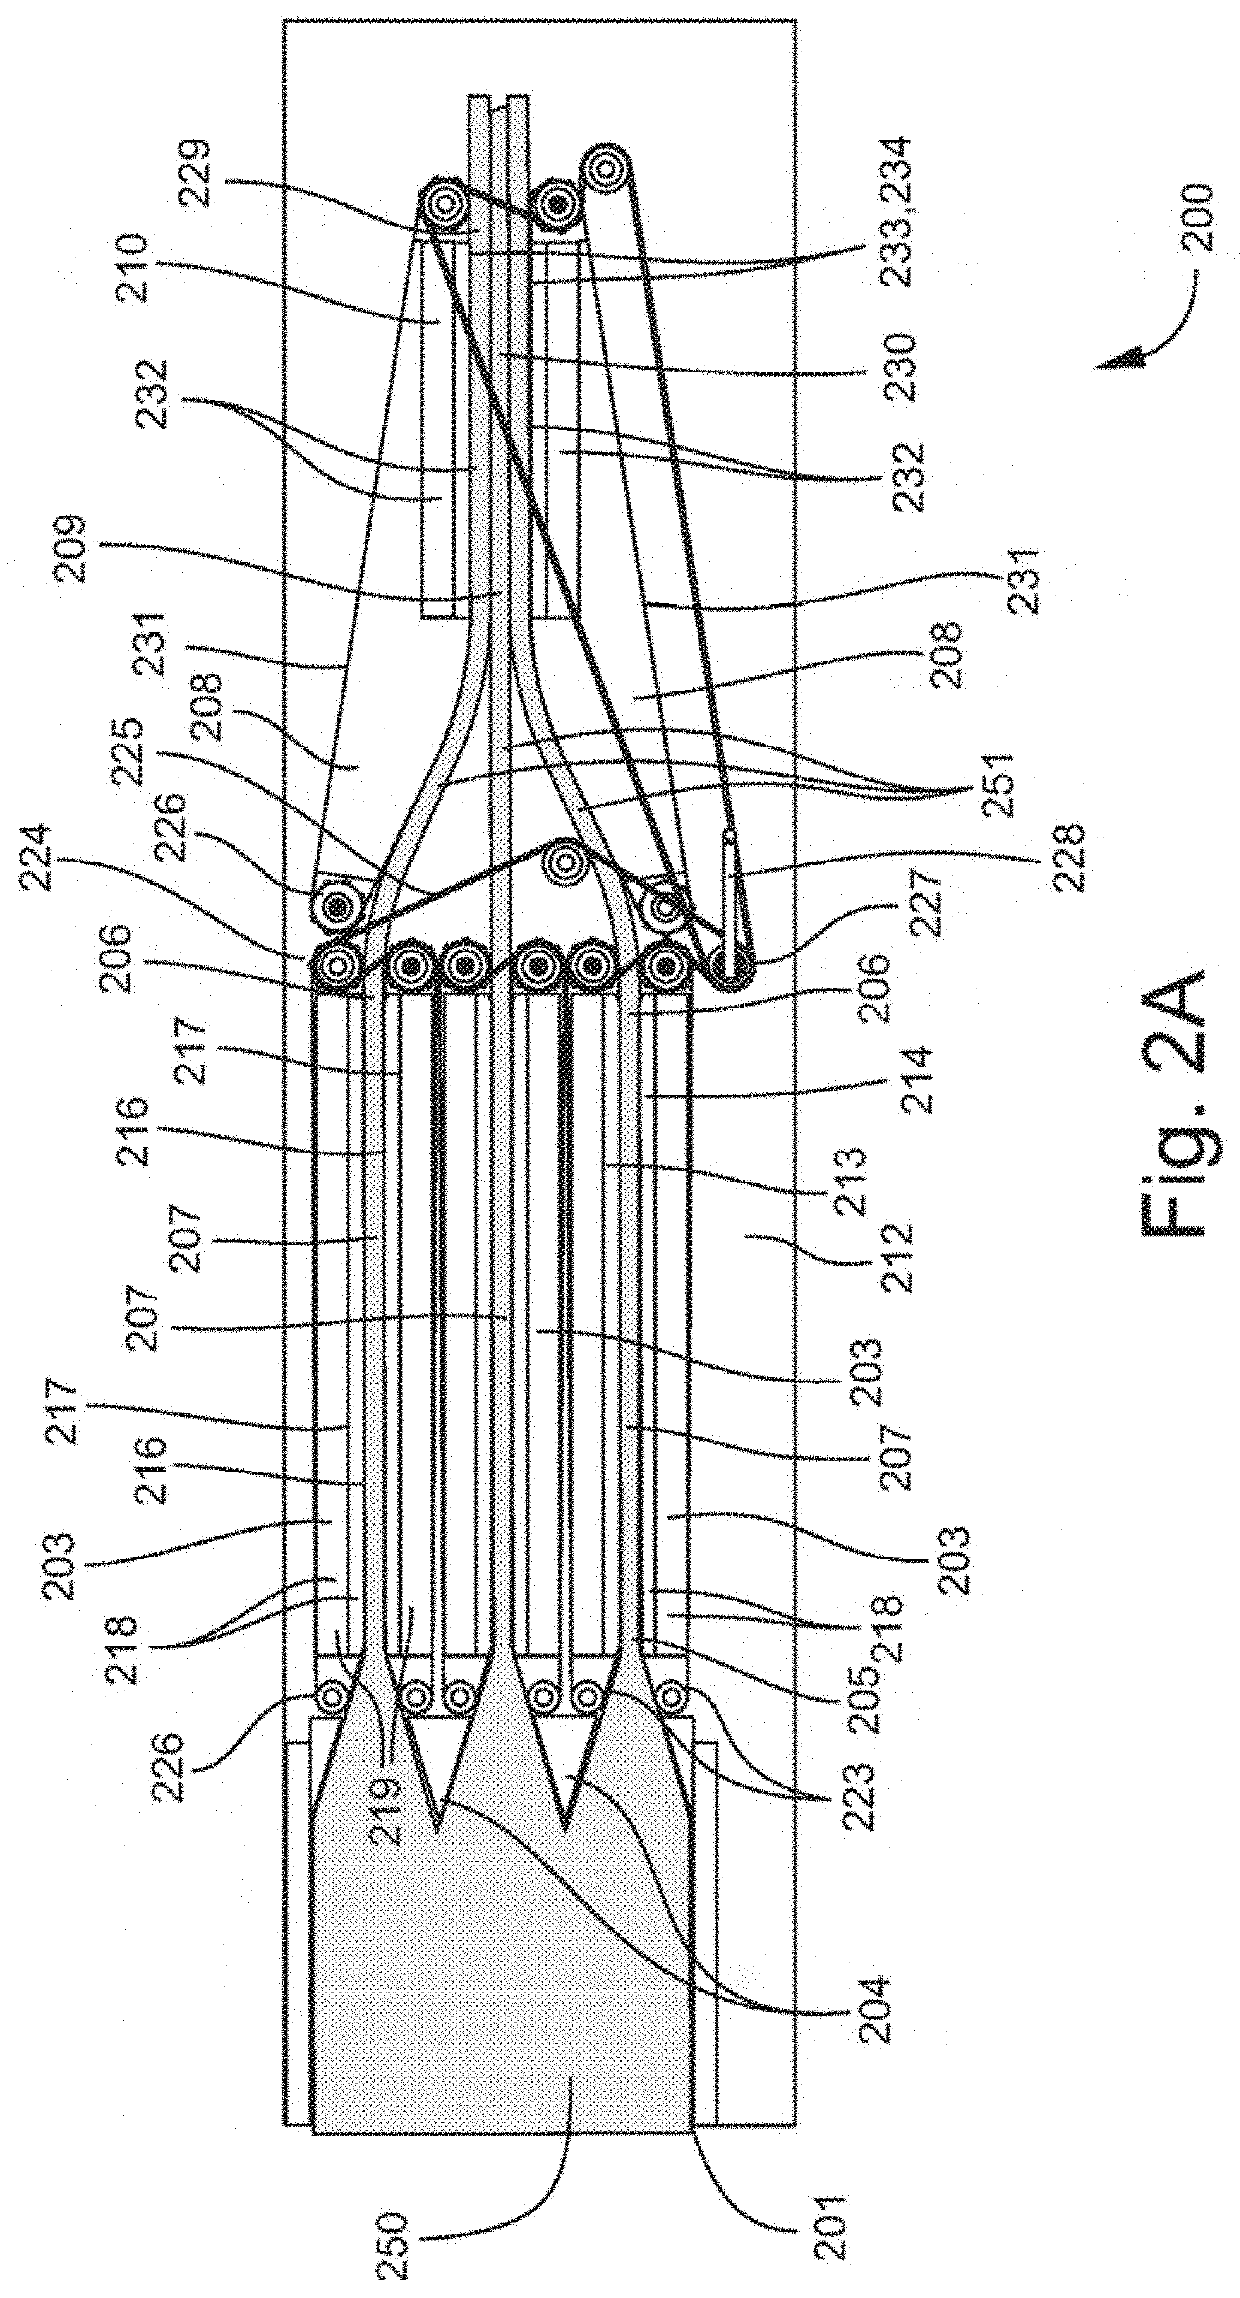 Method and device for forming composite pasta filata cheese